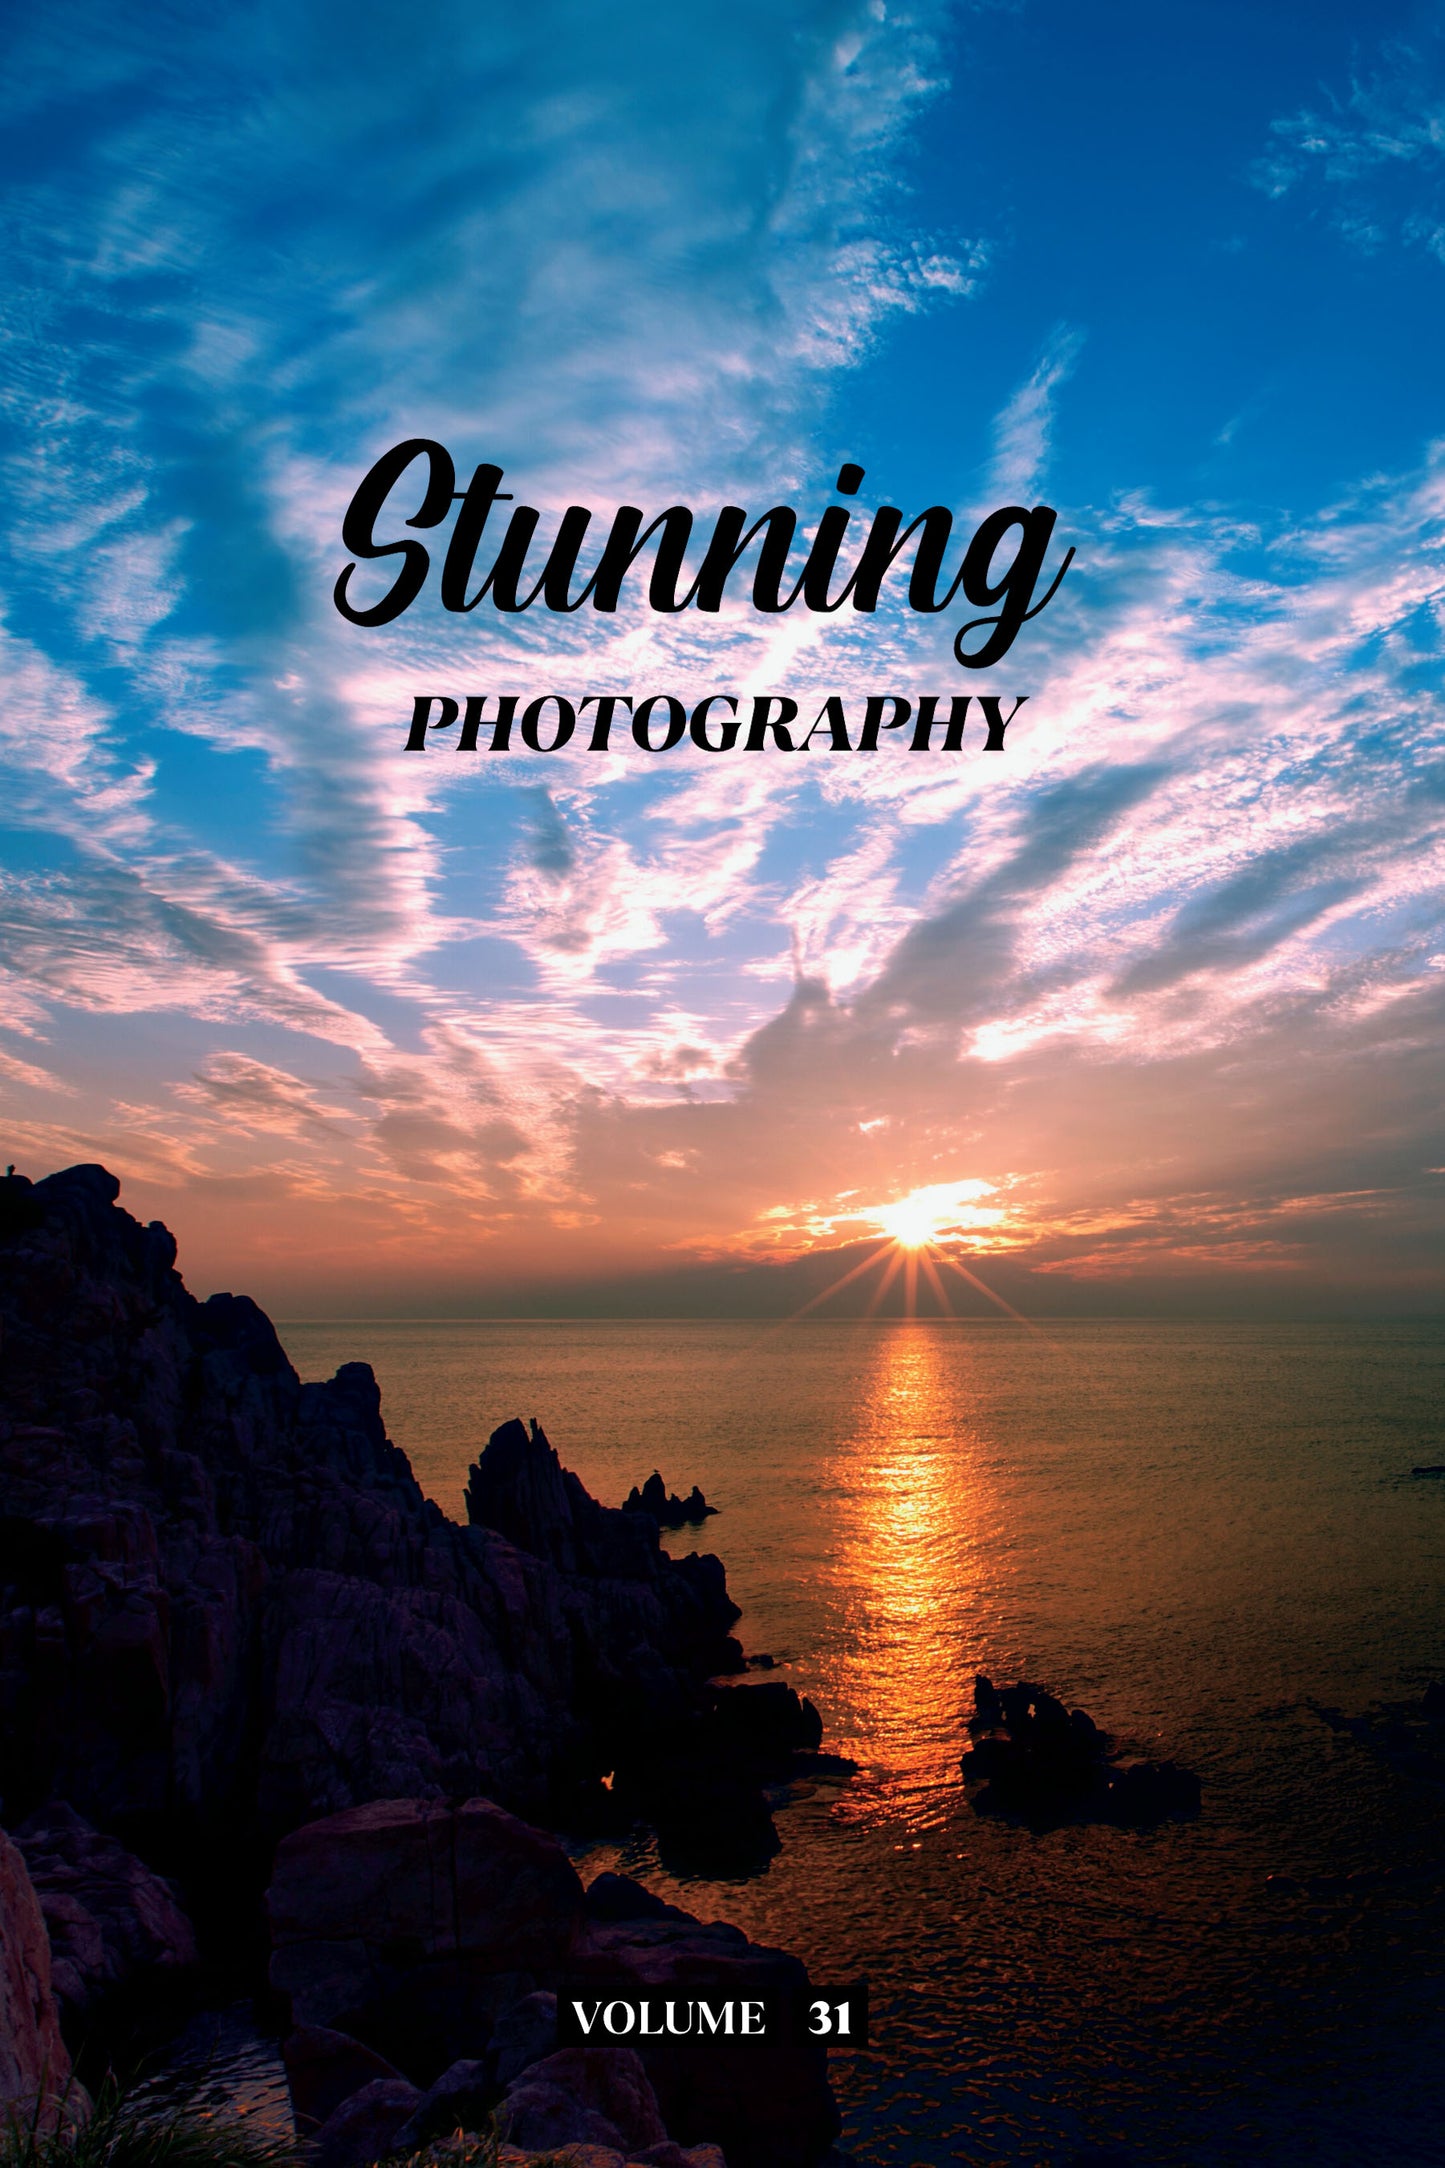 Stunning Photography Volume 31 (Physical Book Pre-Order)